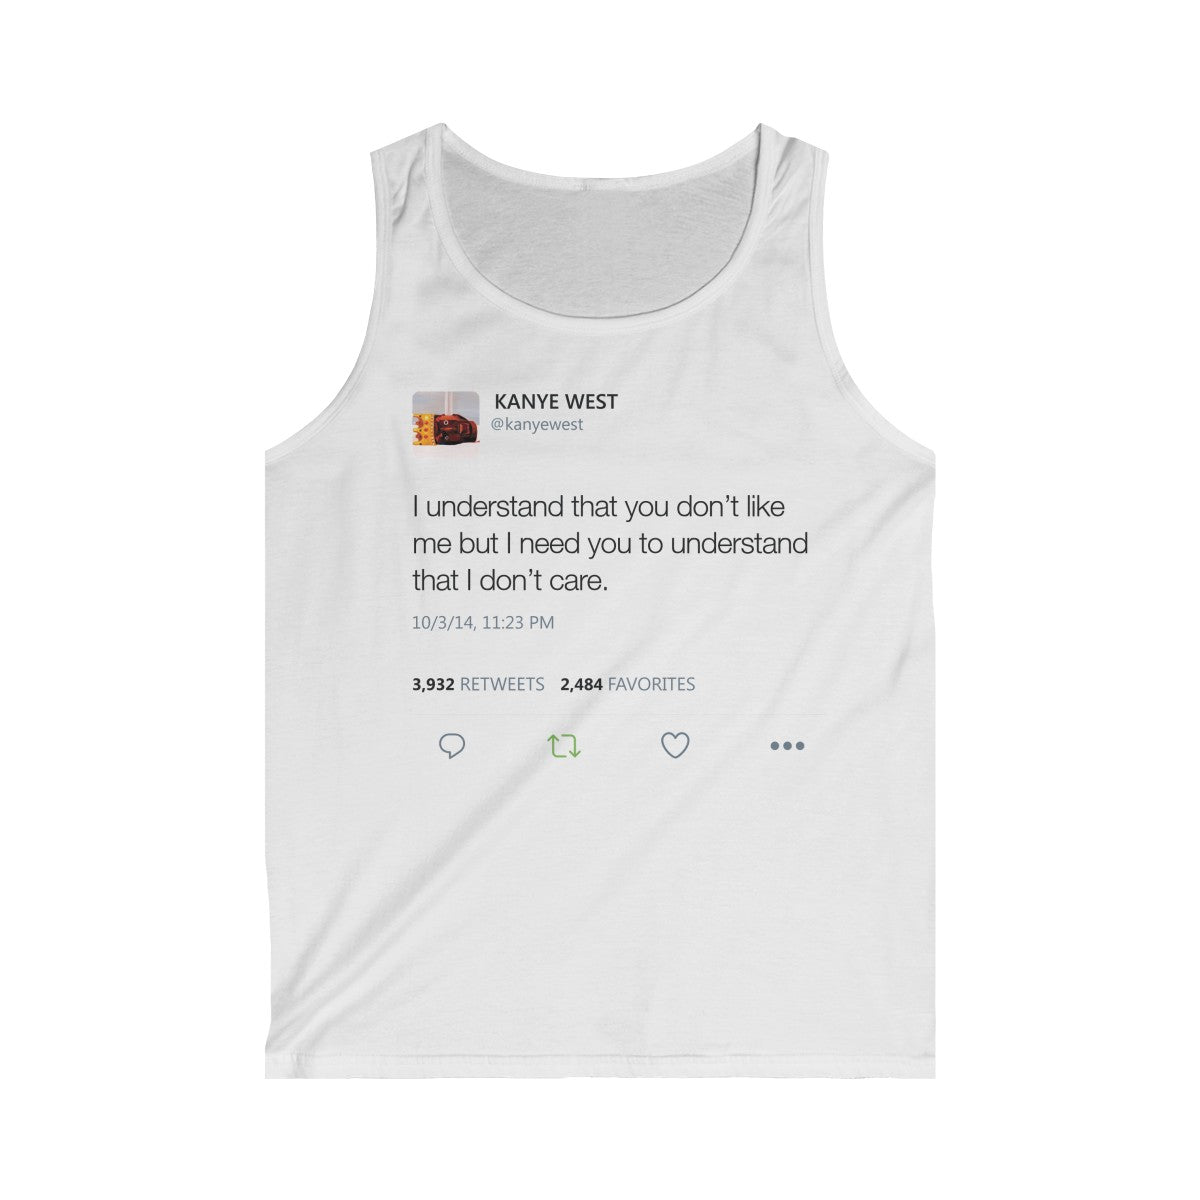 I Understand That You Don't Like Me But I Need You To Understand That I Dont Care Kanye West Tweet Men's Tank Top-White-S-Archethype